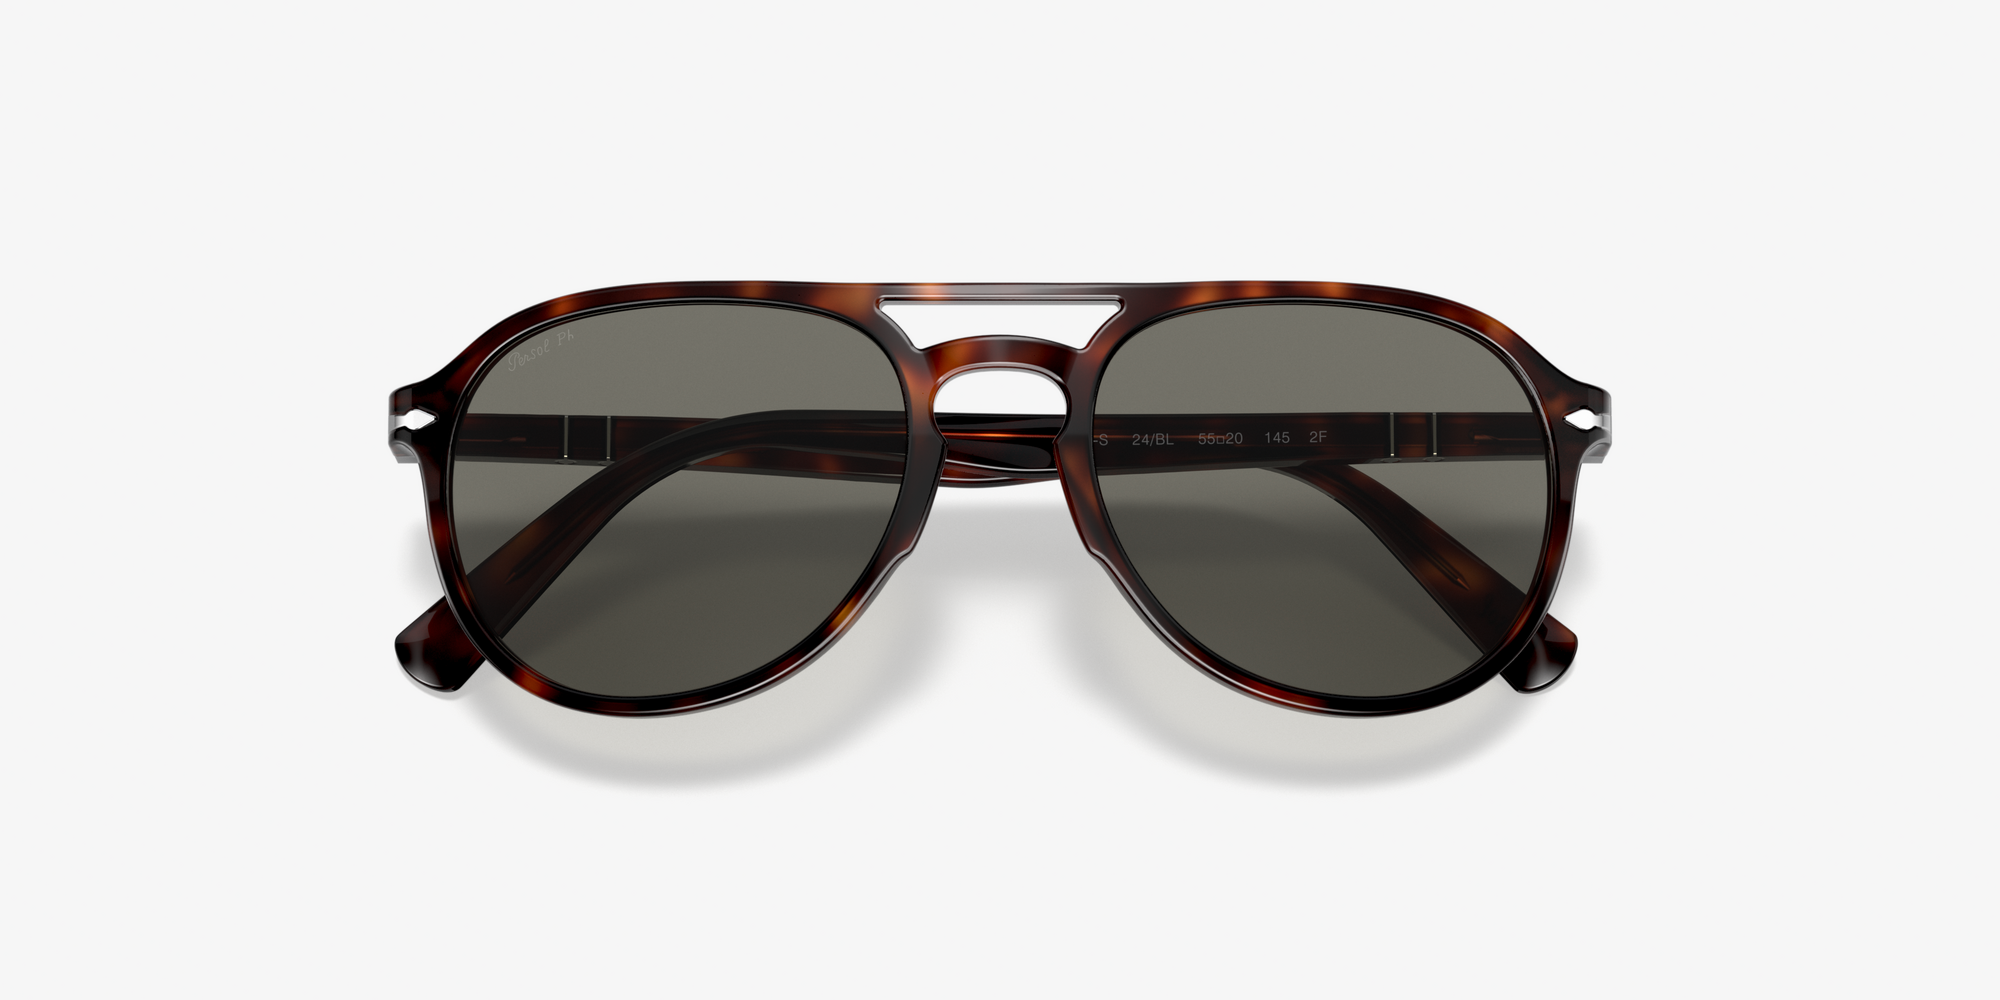 CRAFTED TO THE HIGHEST STANDARDS PHOTOCHROMIC SUNGLASSES WITH POLARIZED LENS 